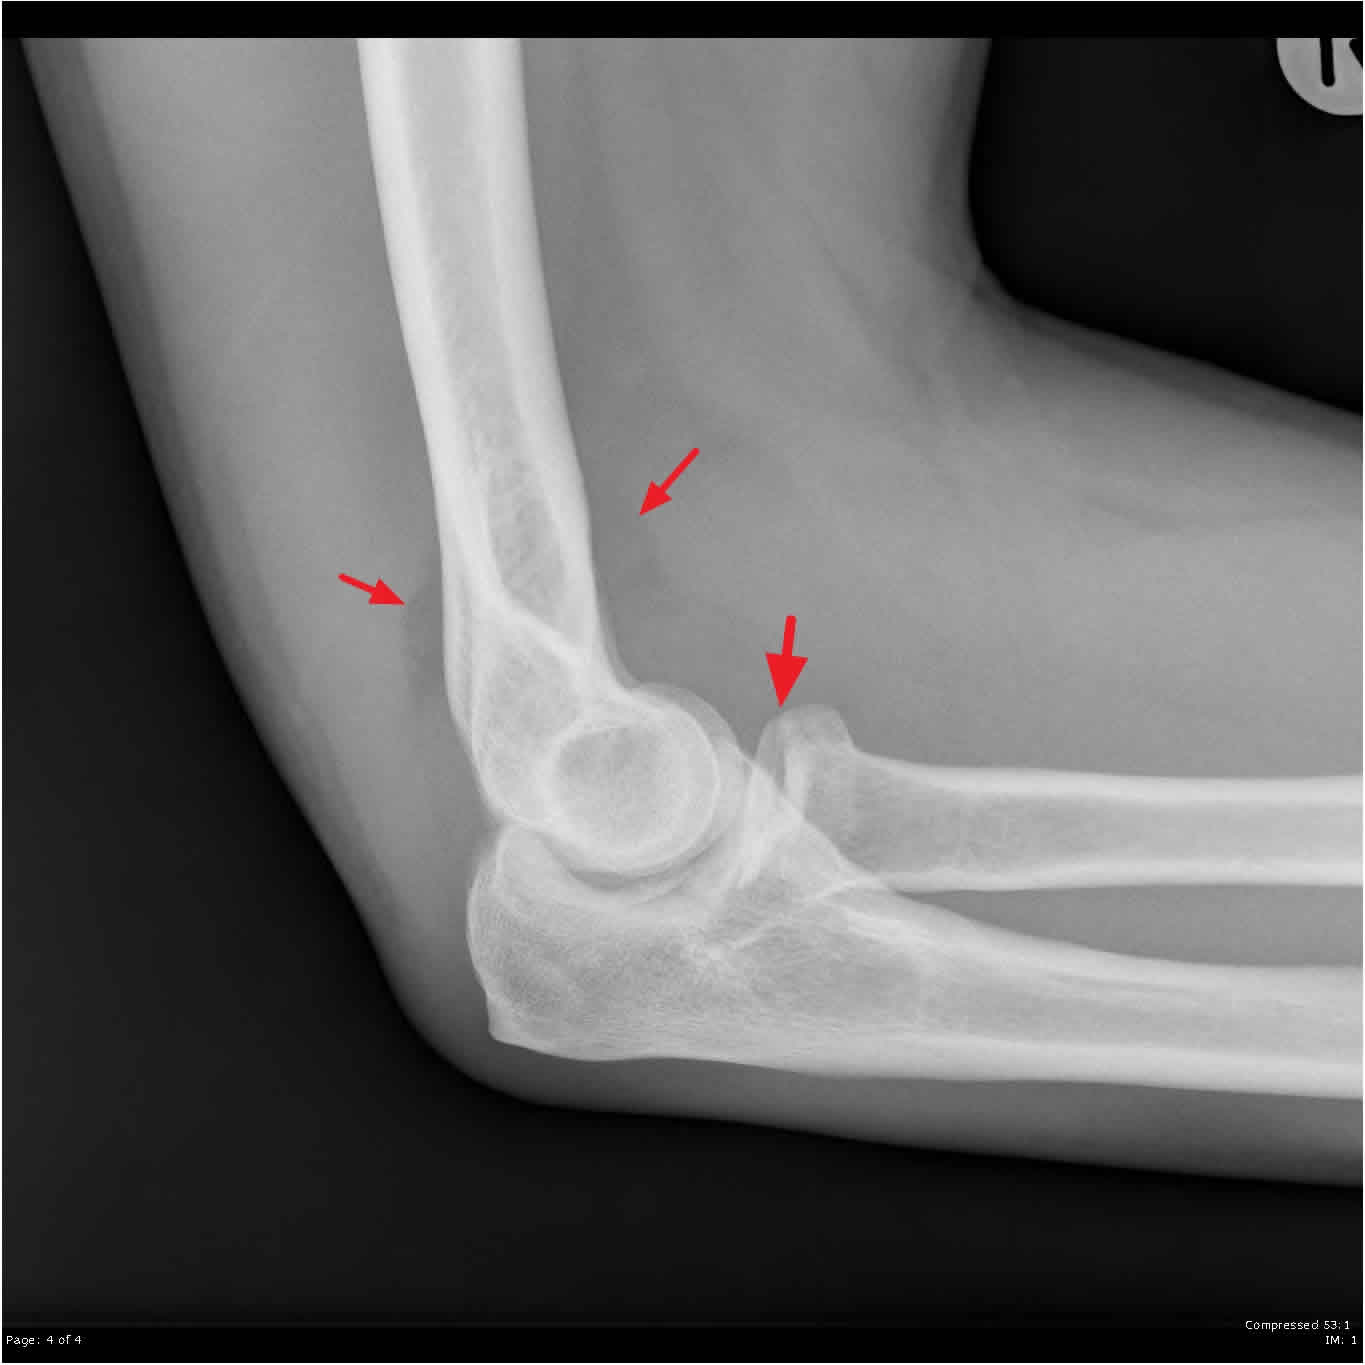 does radial head fracture cause wrist pain